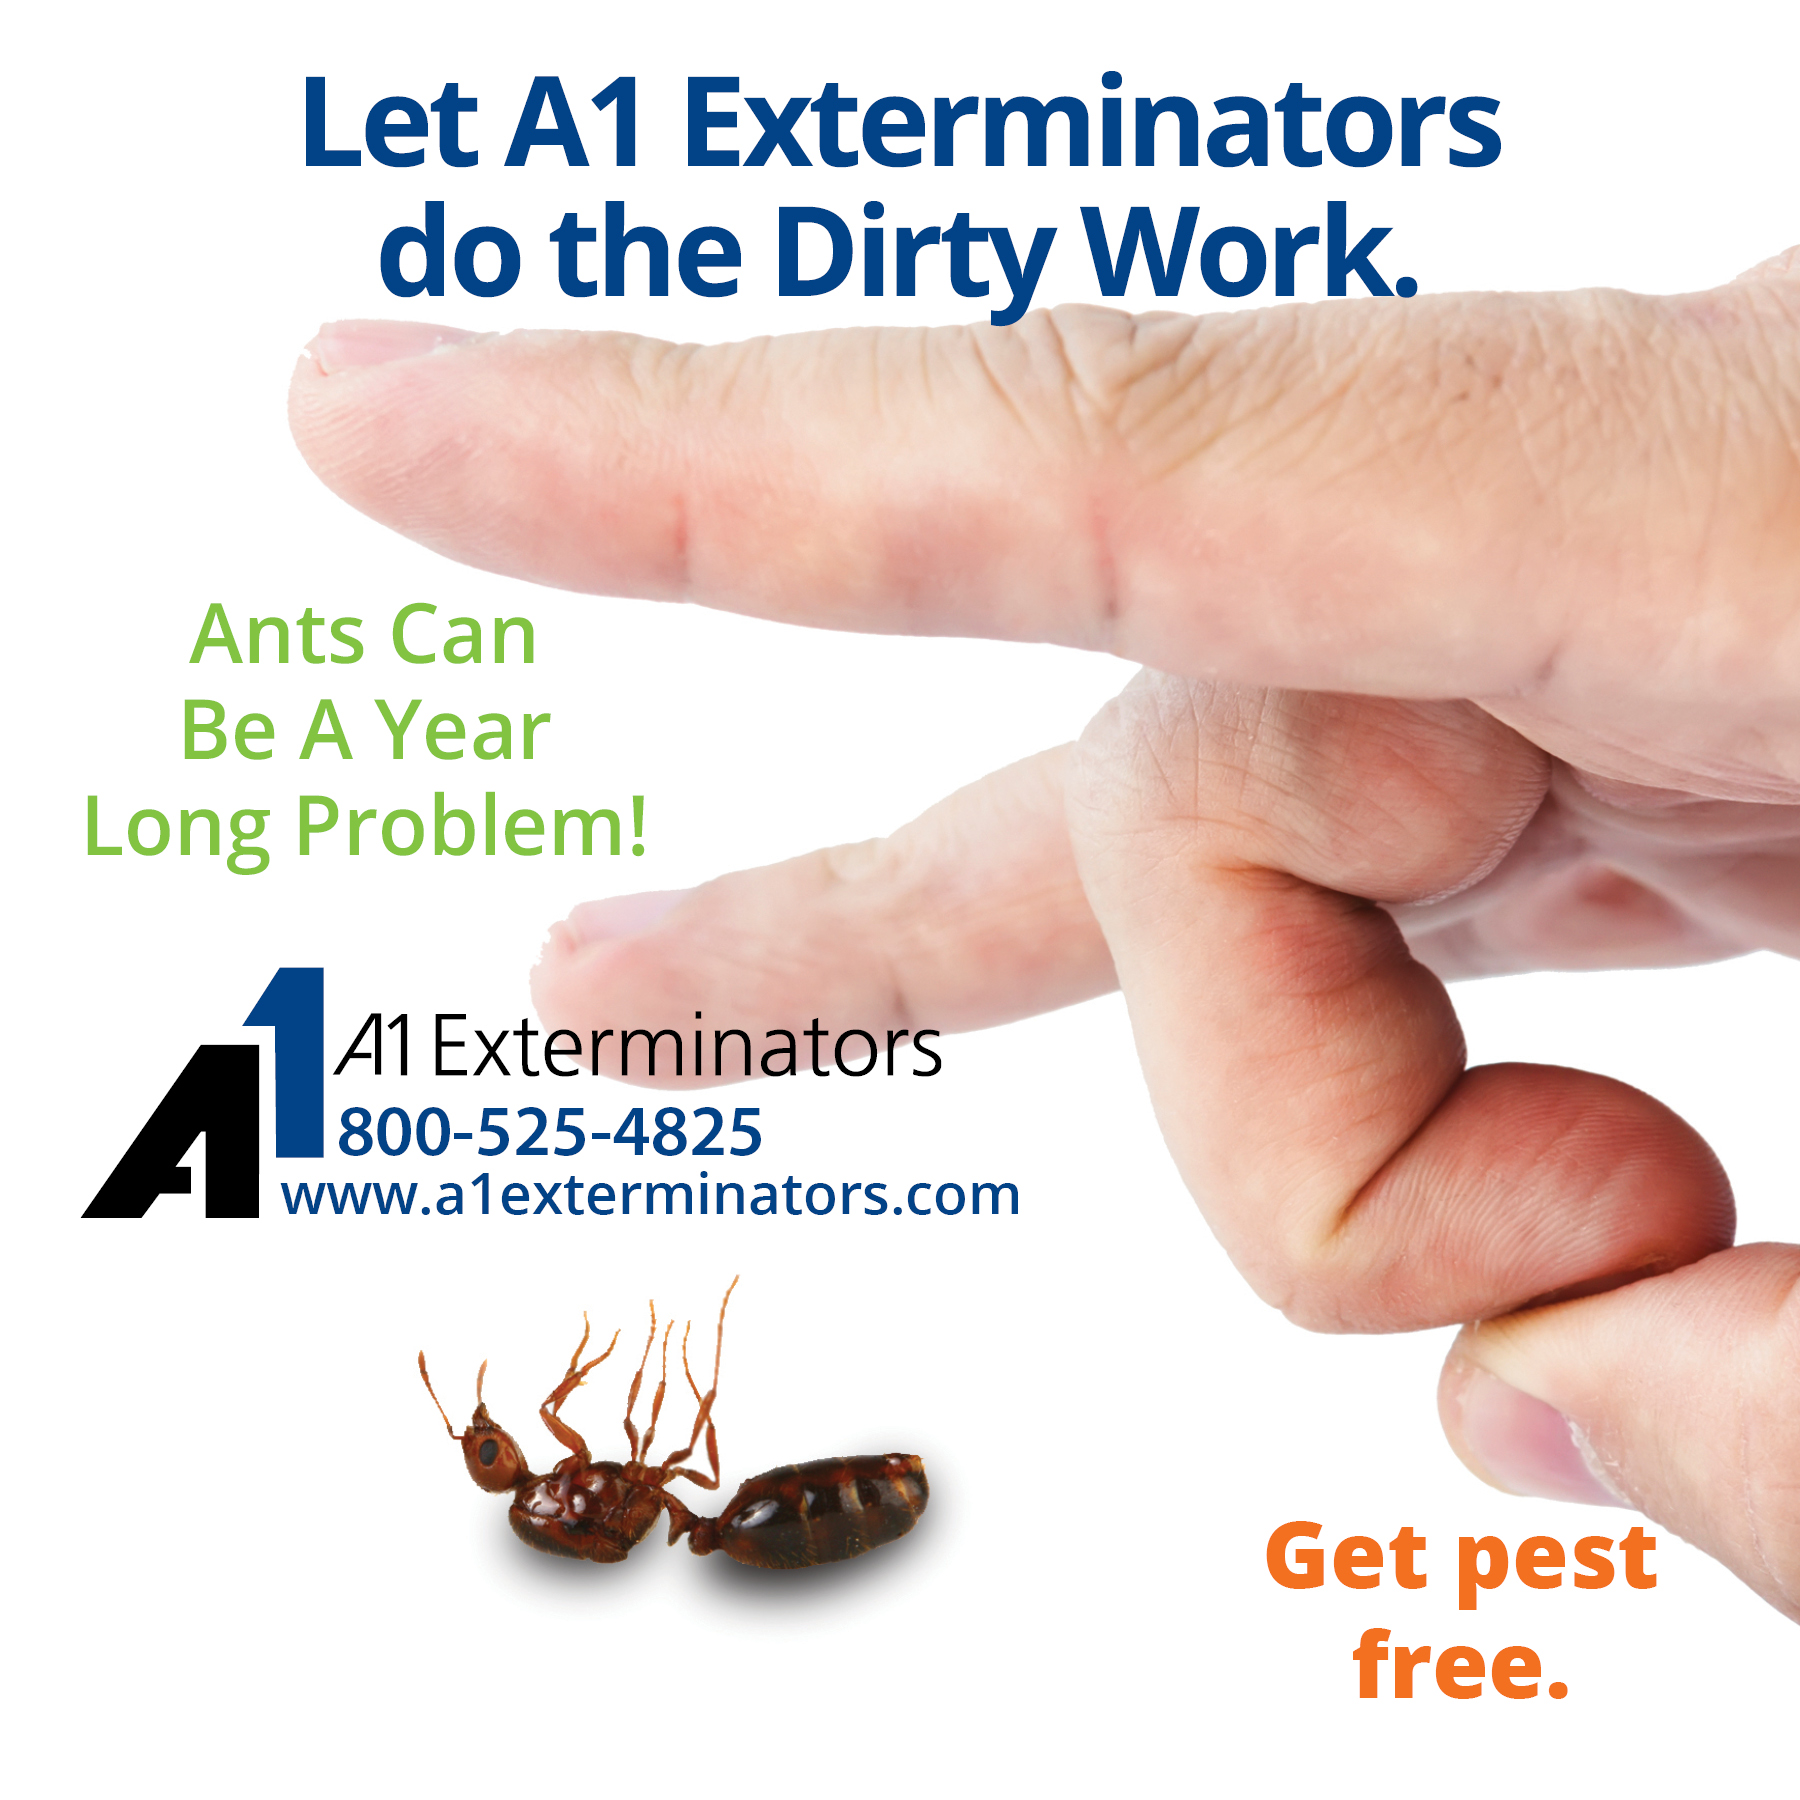 Hand about to flick ant. "Let A1 do the dirty work. Ants can be a year long problem! Get pest free." [A1 Logo]